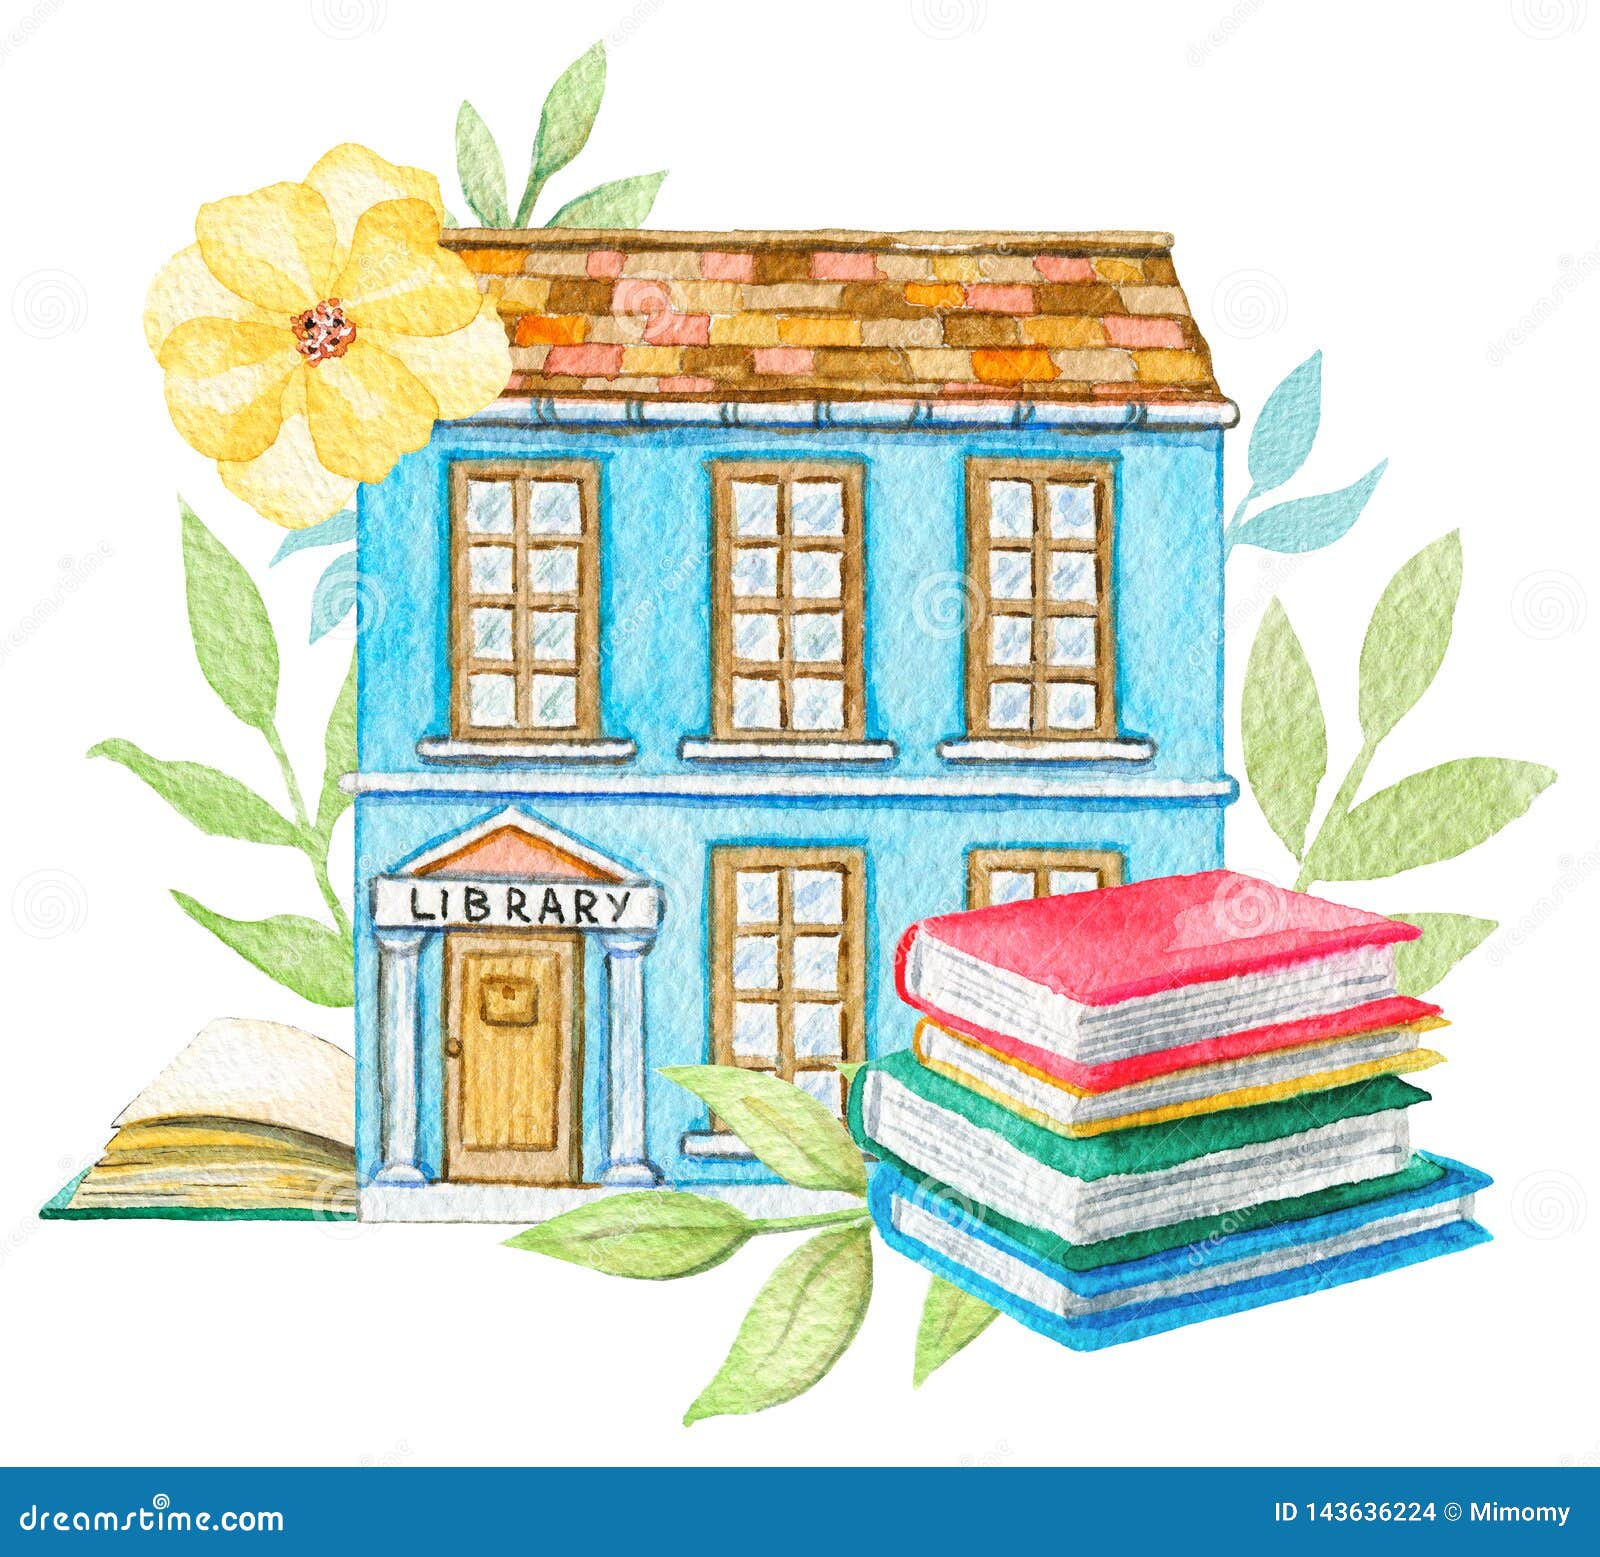 Watercolor Blue Cartoon Library Building in Flowers with Pile of Books  Stock Illustration - Illustration of house, cute: 143636224